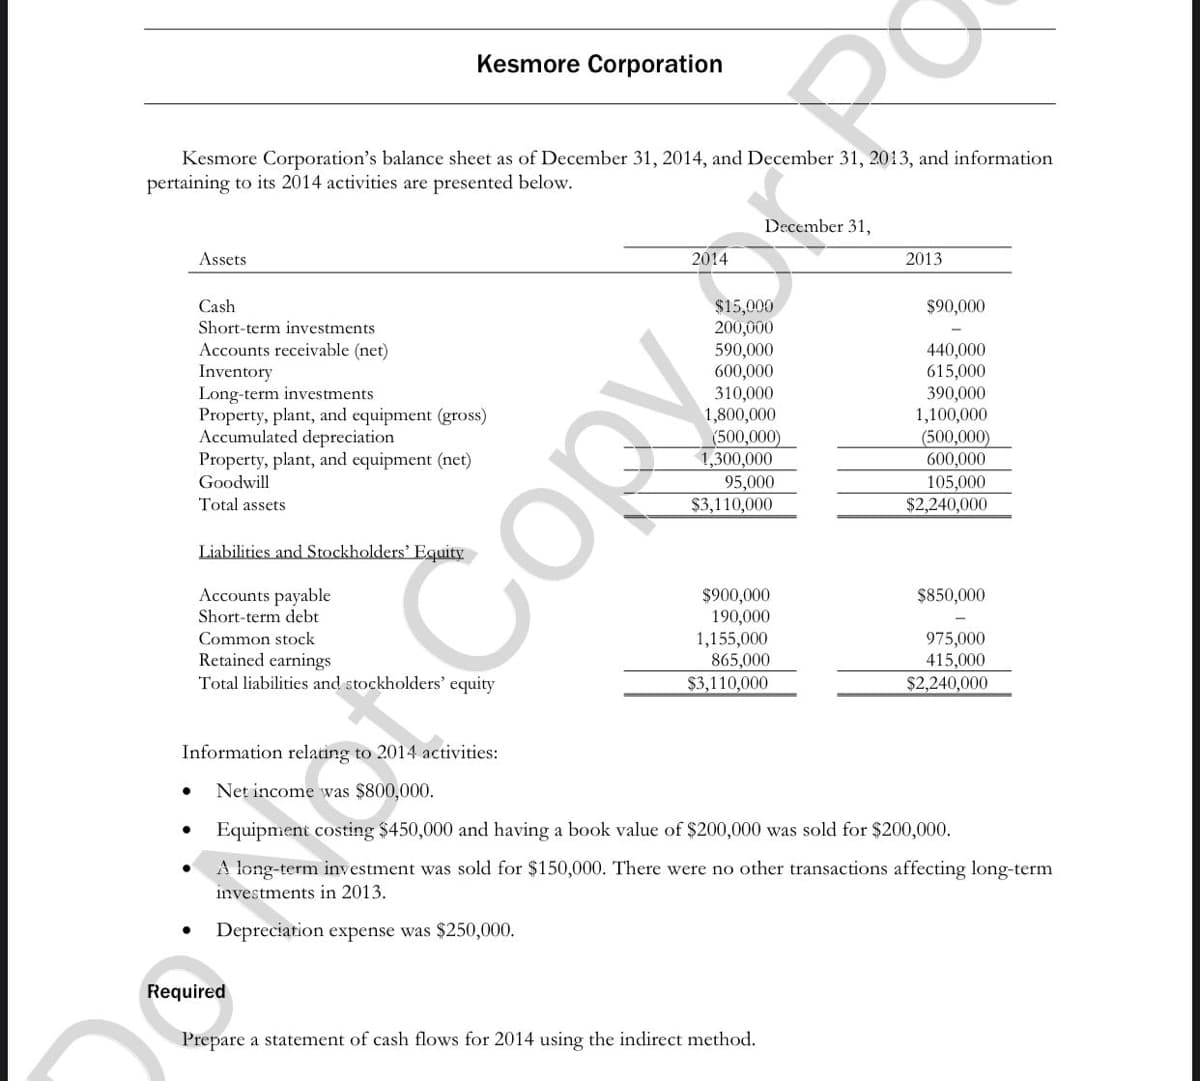 Assets
Kesmore Corporation
Kesmore Corporation's balance sheet as of December 31, 2014, and December 31, 2013, and information
pertaining to its 2014 activities are presented below.
Cash
Short-term investments.
Accounts receivable (net)
Inventory
Long-term investments
Property, plant, and equipment (gross)
Accumulated depreciation
Property, plant, and equipment (net)
Goodwill
Total assets
Liabilities and Stockholders' Equity
Accounts payable
Short-term debt
Common stock
Retained earnings
Total liabilities and stockholders' equity
Information relating to 2014 activities:
Net income was $800,000.
2014
$15,000
200,000
590,000
600,000
310,000
1,800,000
(500,000)
do
December 31,
95,000
$3,110,000
OFR
$900,000
190,000
1,155,000
865,000
$3,110,000
Required
Prepare a statement of cash flows for 2014 using the indirect method.
2013
$90,000
440,000
615,000
390,000
1,100,000
(500,000)
600,000
105,000
$2,240,000
$850,000
975,000
415,000
$2,240,000
Equipment costing $450,000 and having a book value of $200,000 was sold for $200,000.
A long-term investment was sold for $150,000. There were no other transactions affecting long-term
investments in 2013.
Depreciation expense was $250,000.